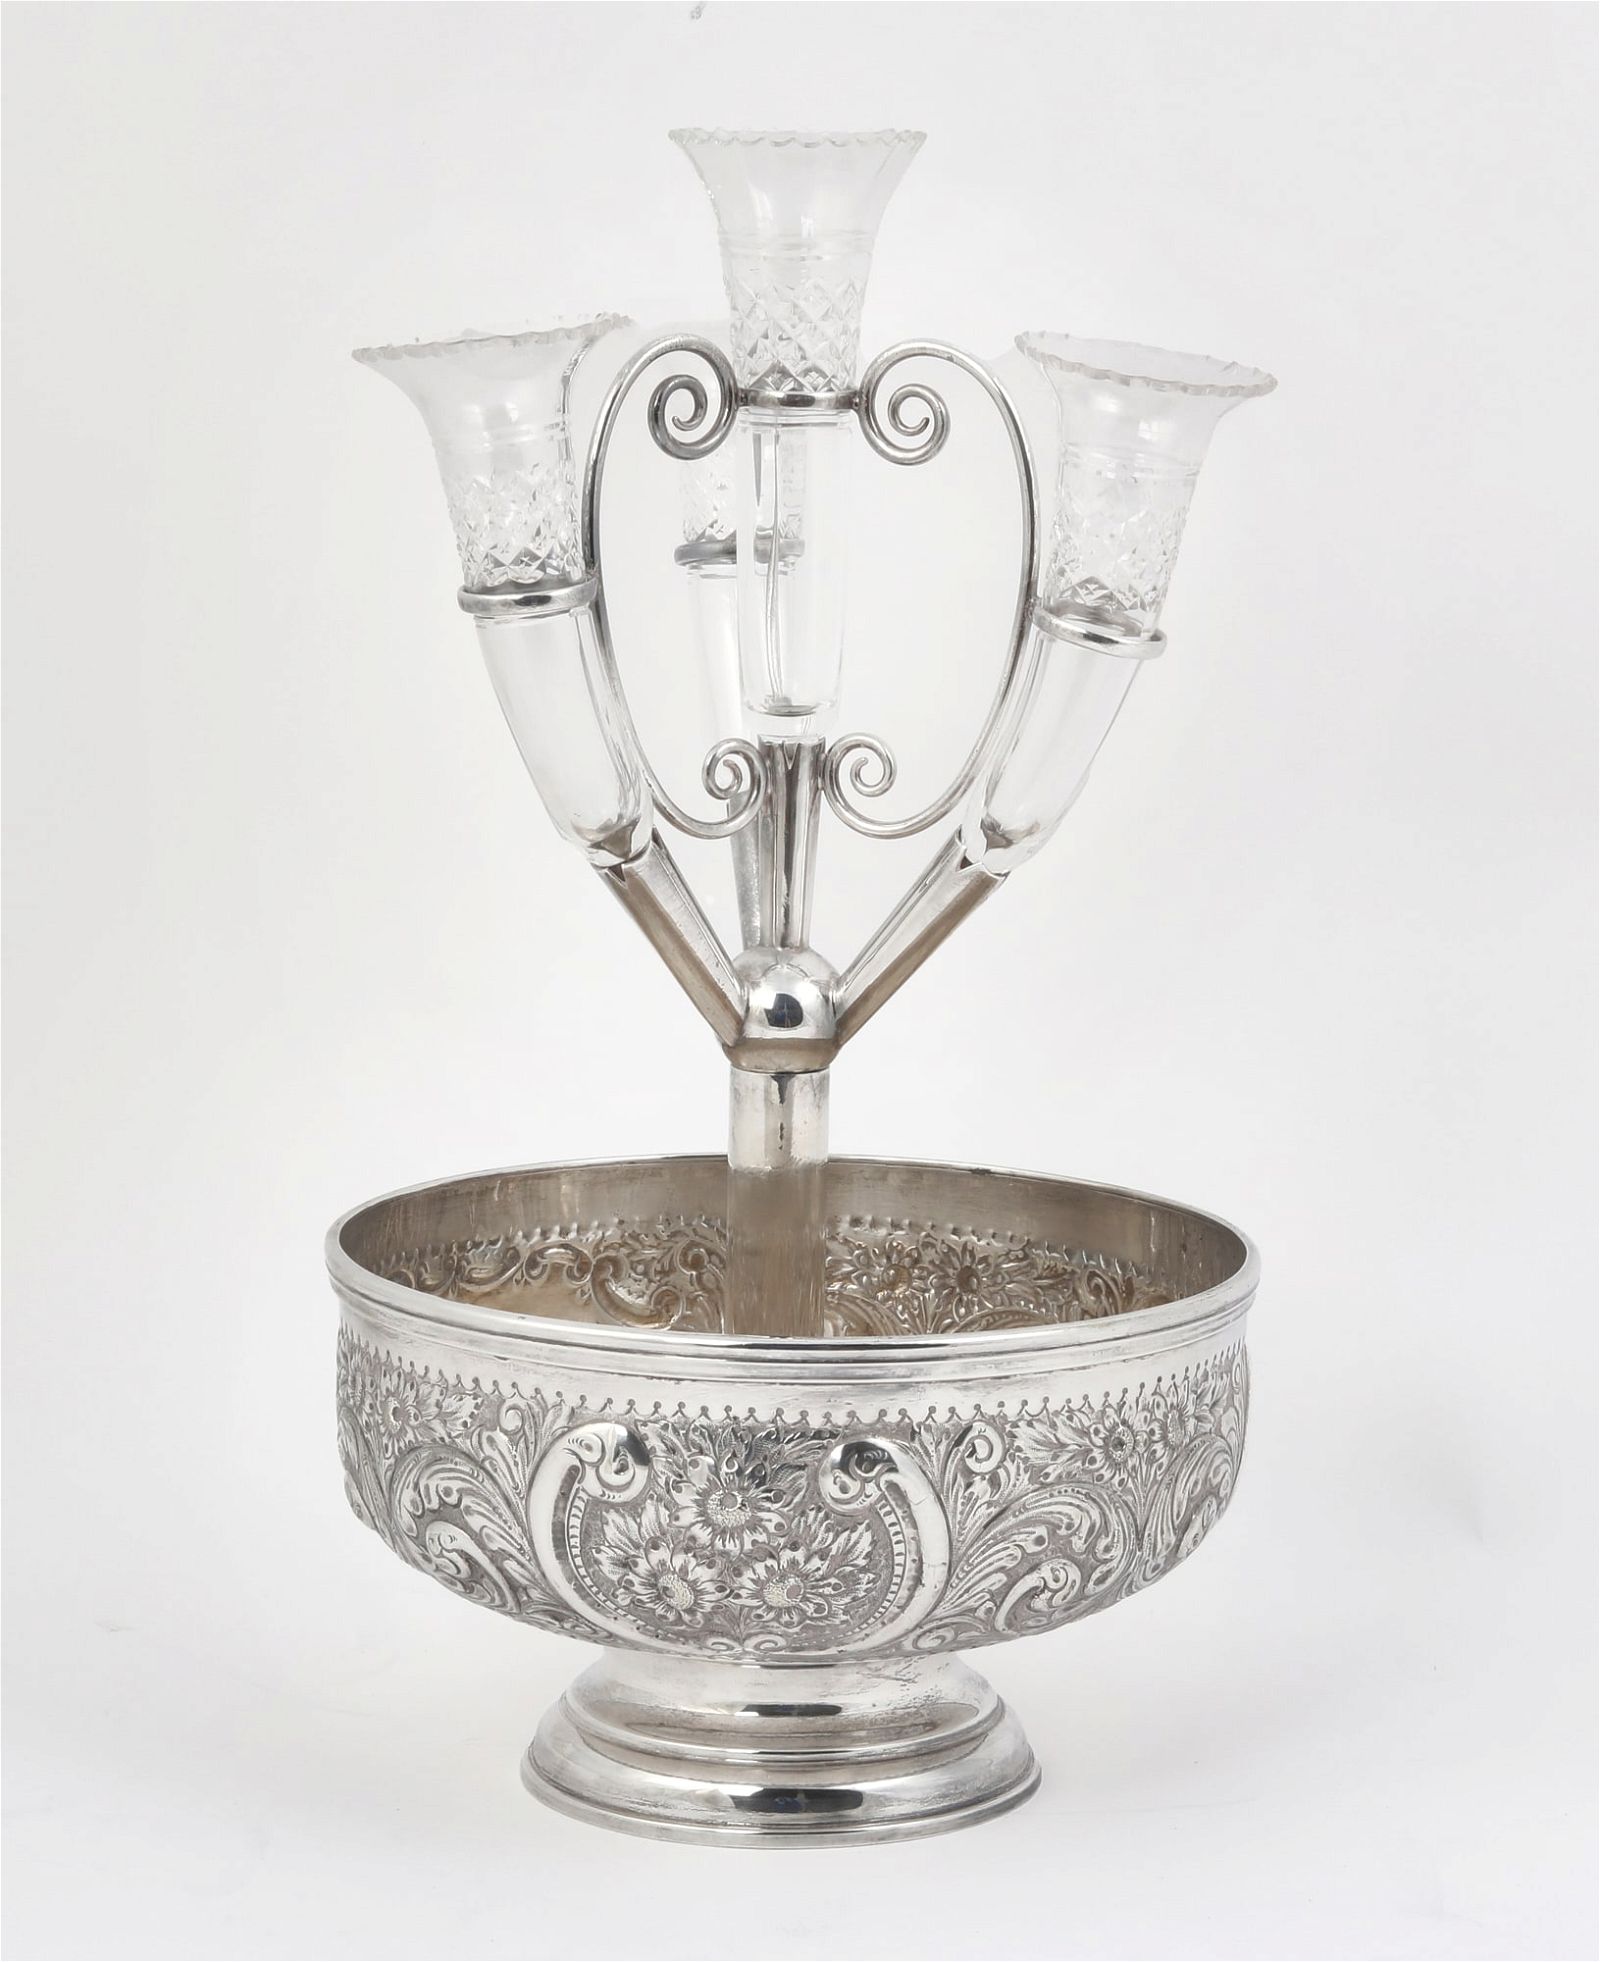 A SILVERPLATE AND GLASS CENTERPIECE,